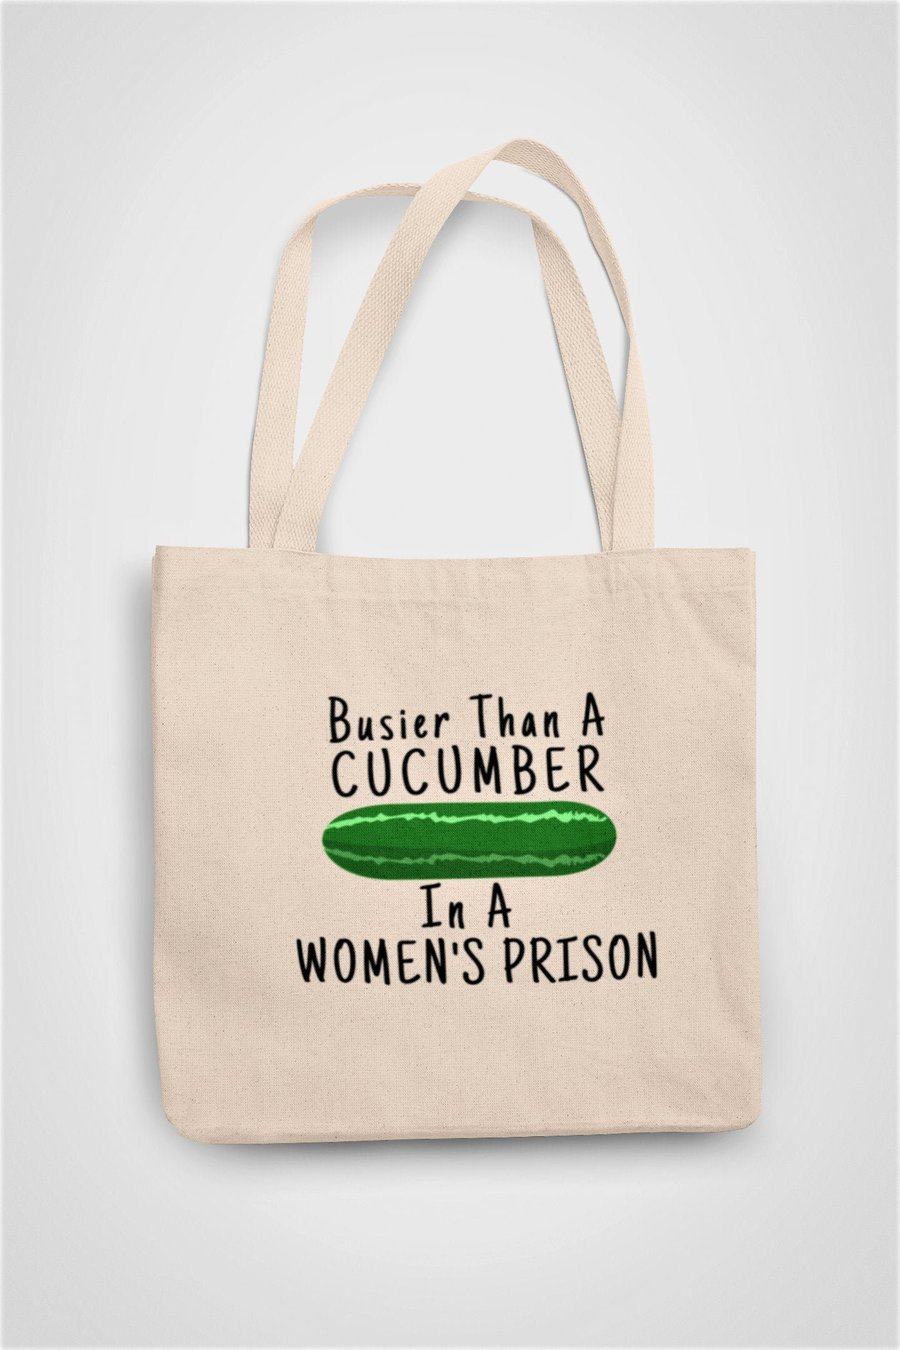 Busier than a Cucumber Tote Bag Reusable Cotton bag - funny adult birthday gift